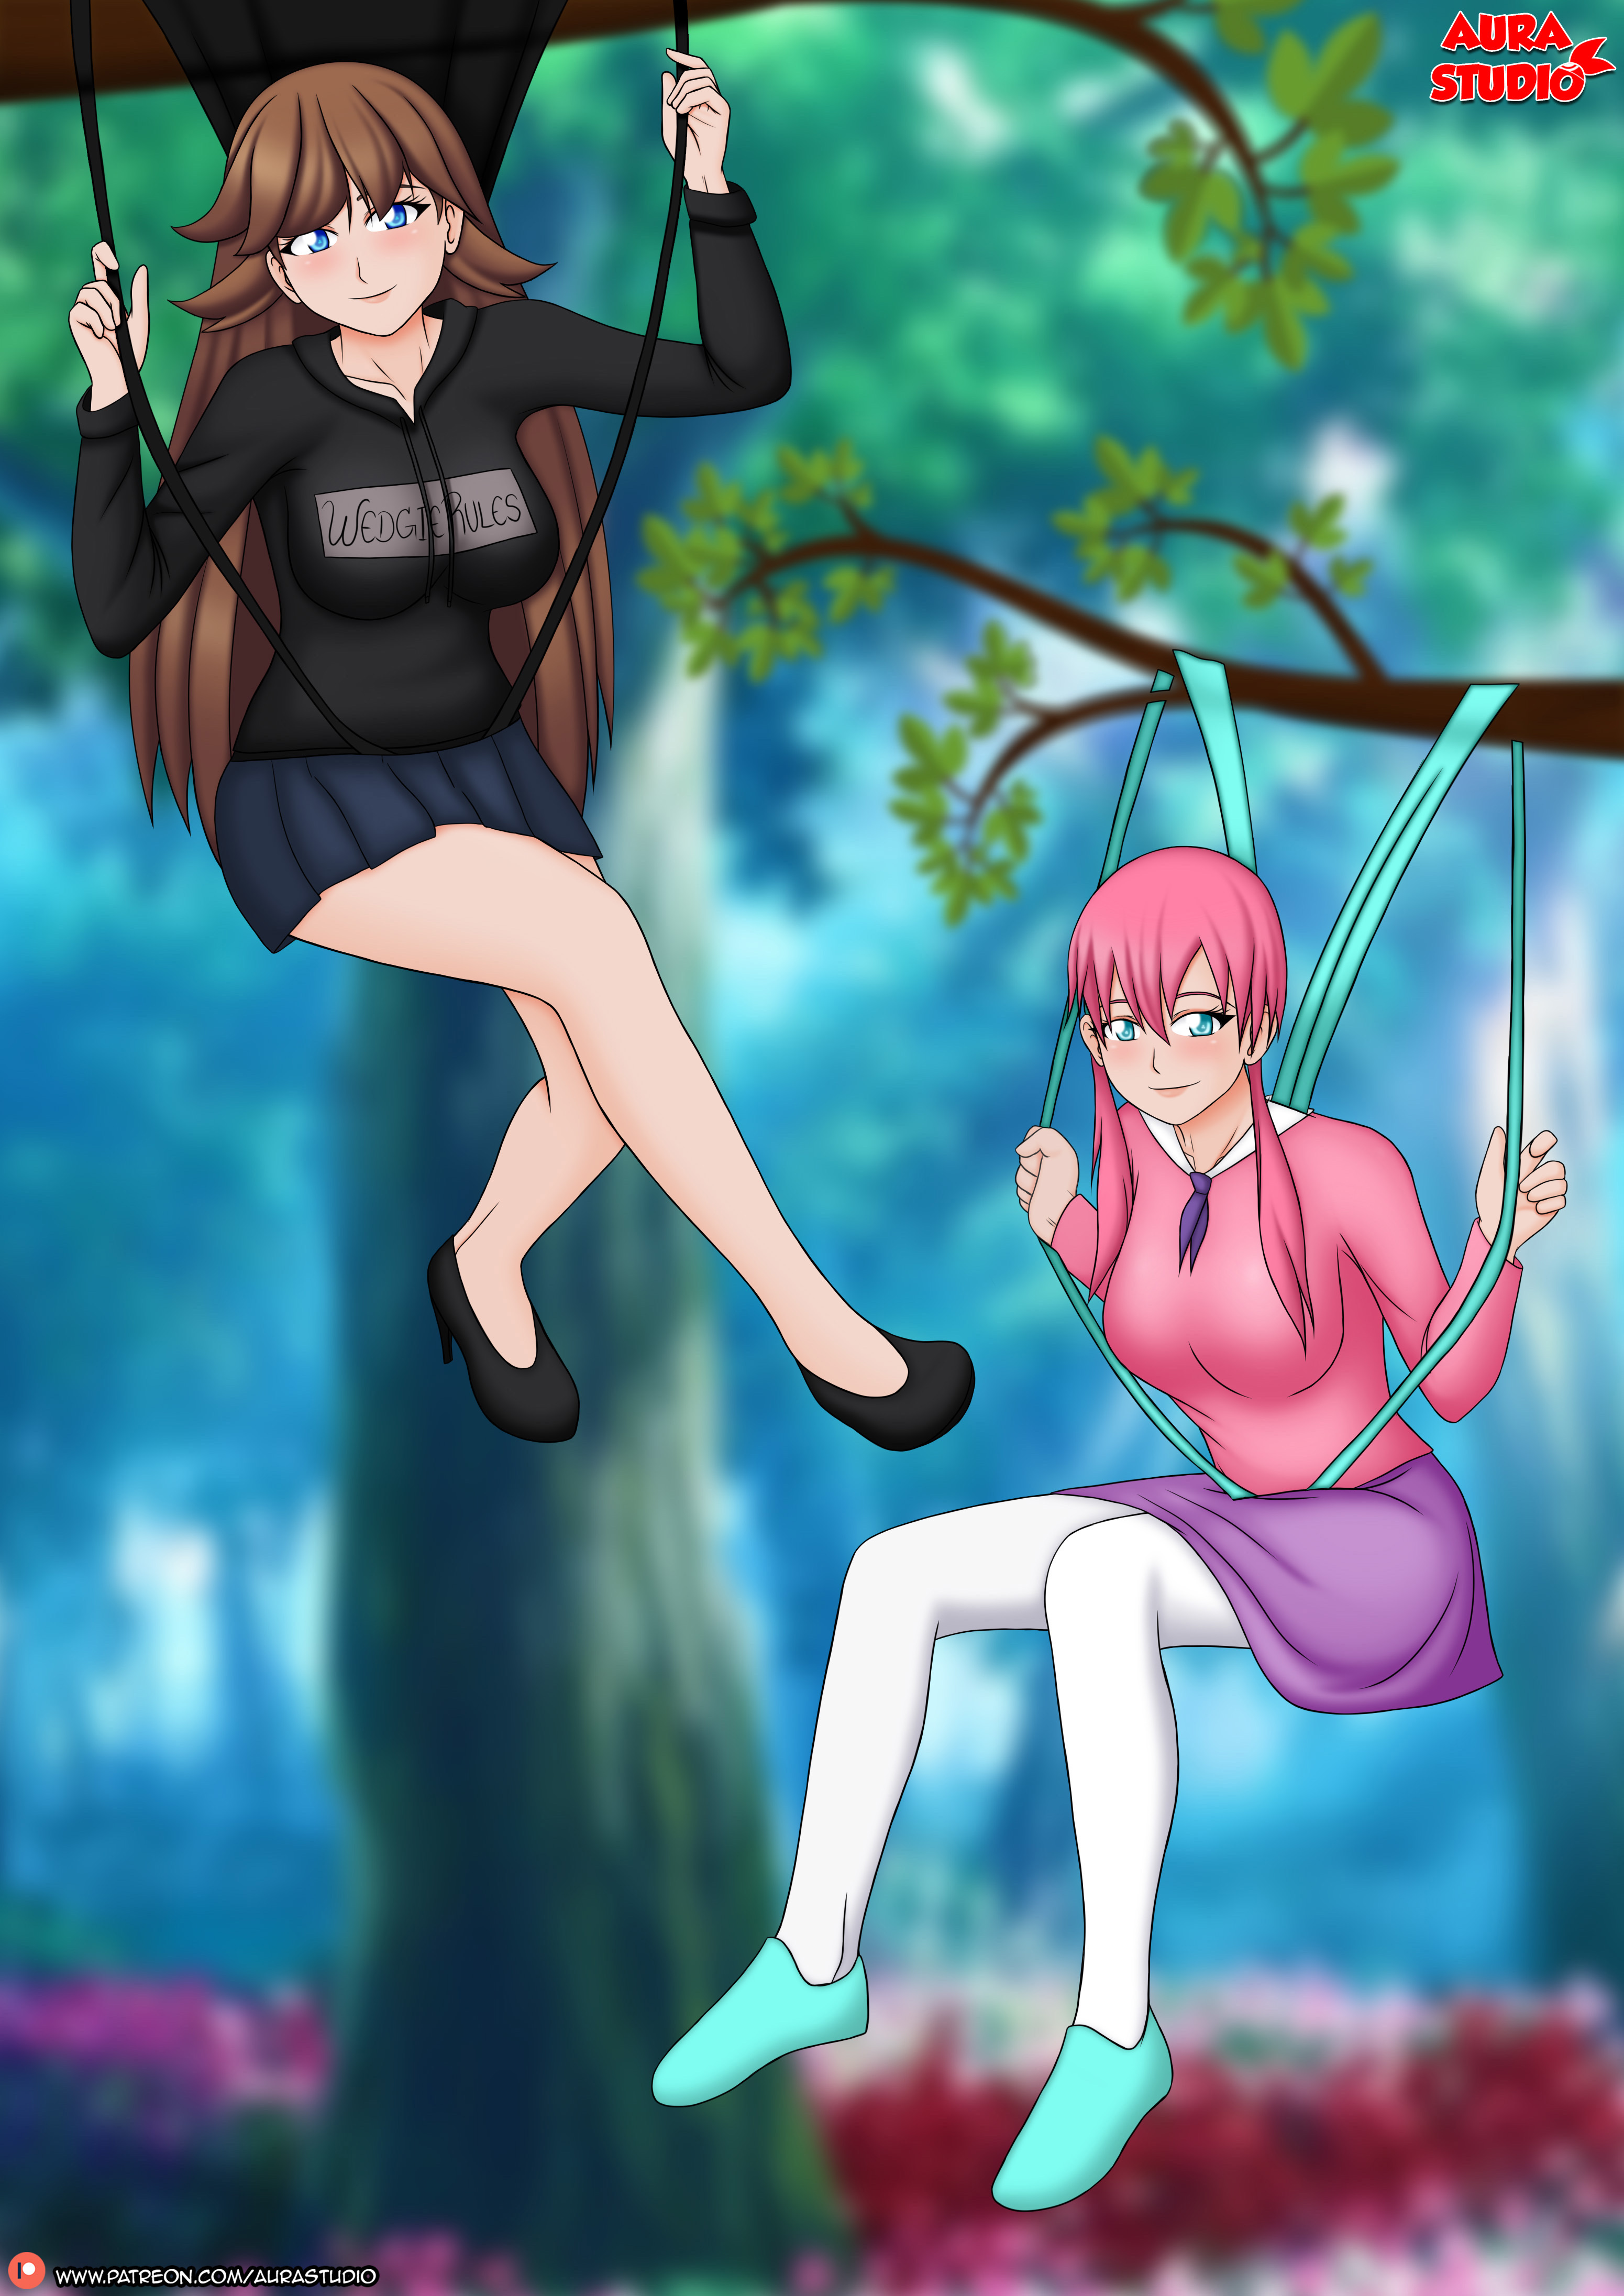 Emily X Amiya Swing Wedgie Wedgie Rules Edition By Wedgiemask75 On Deviantart